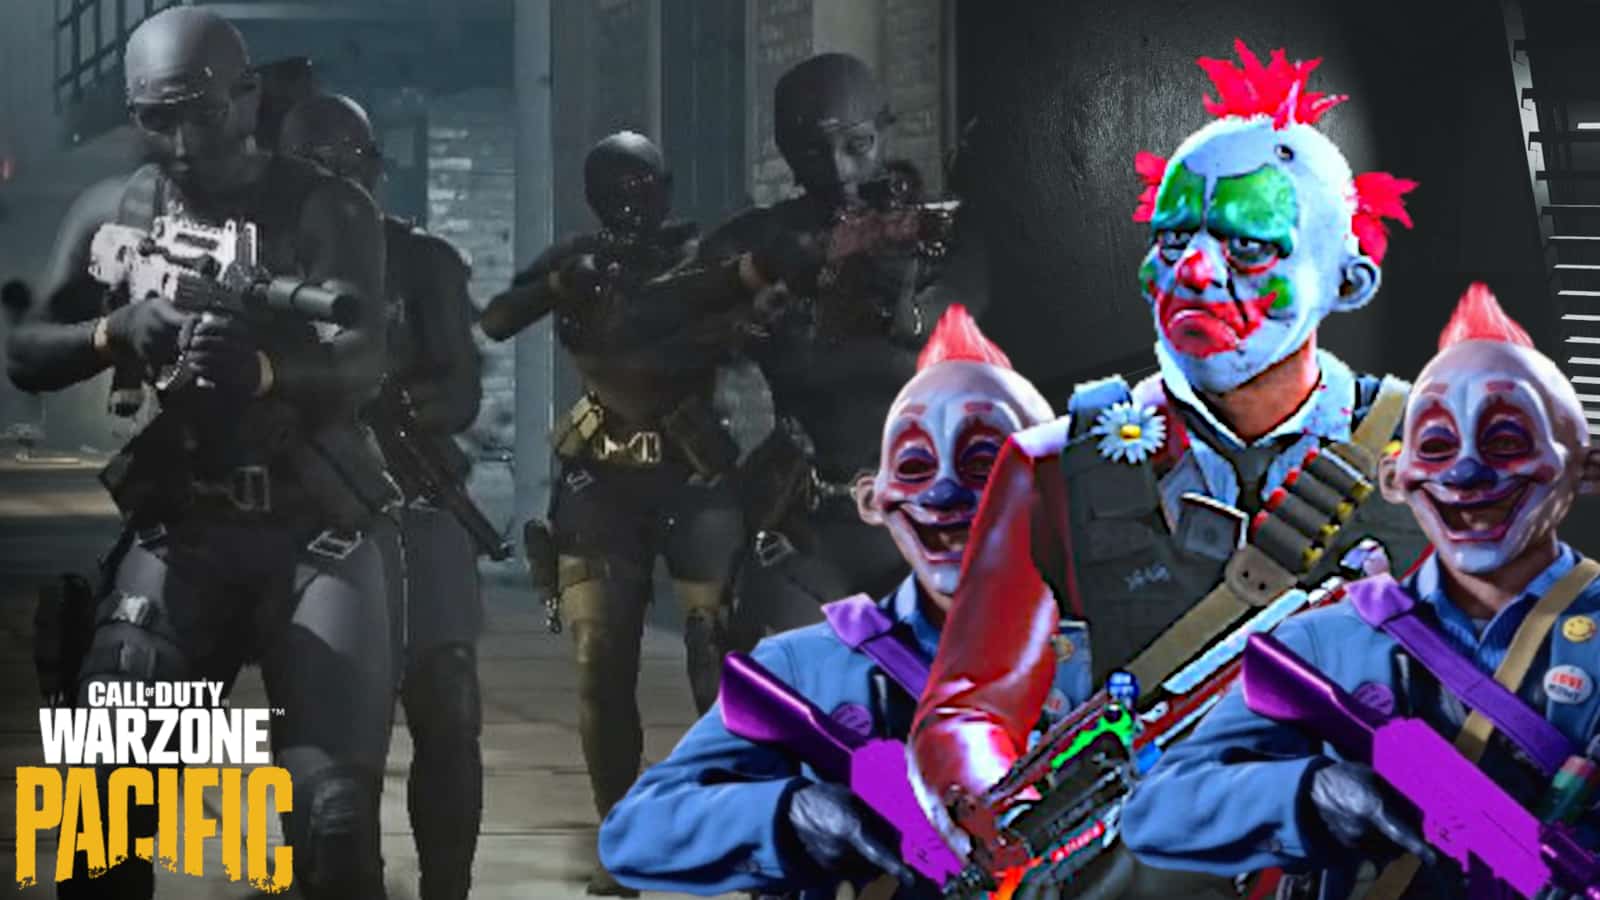 call of duty warzone pacific roze skins clowns